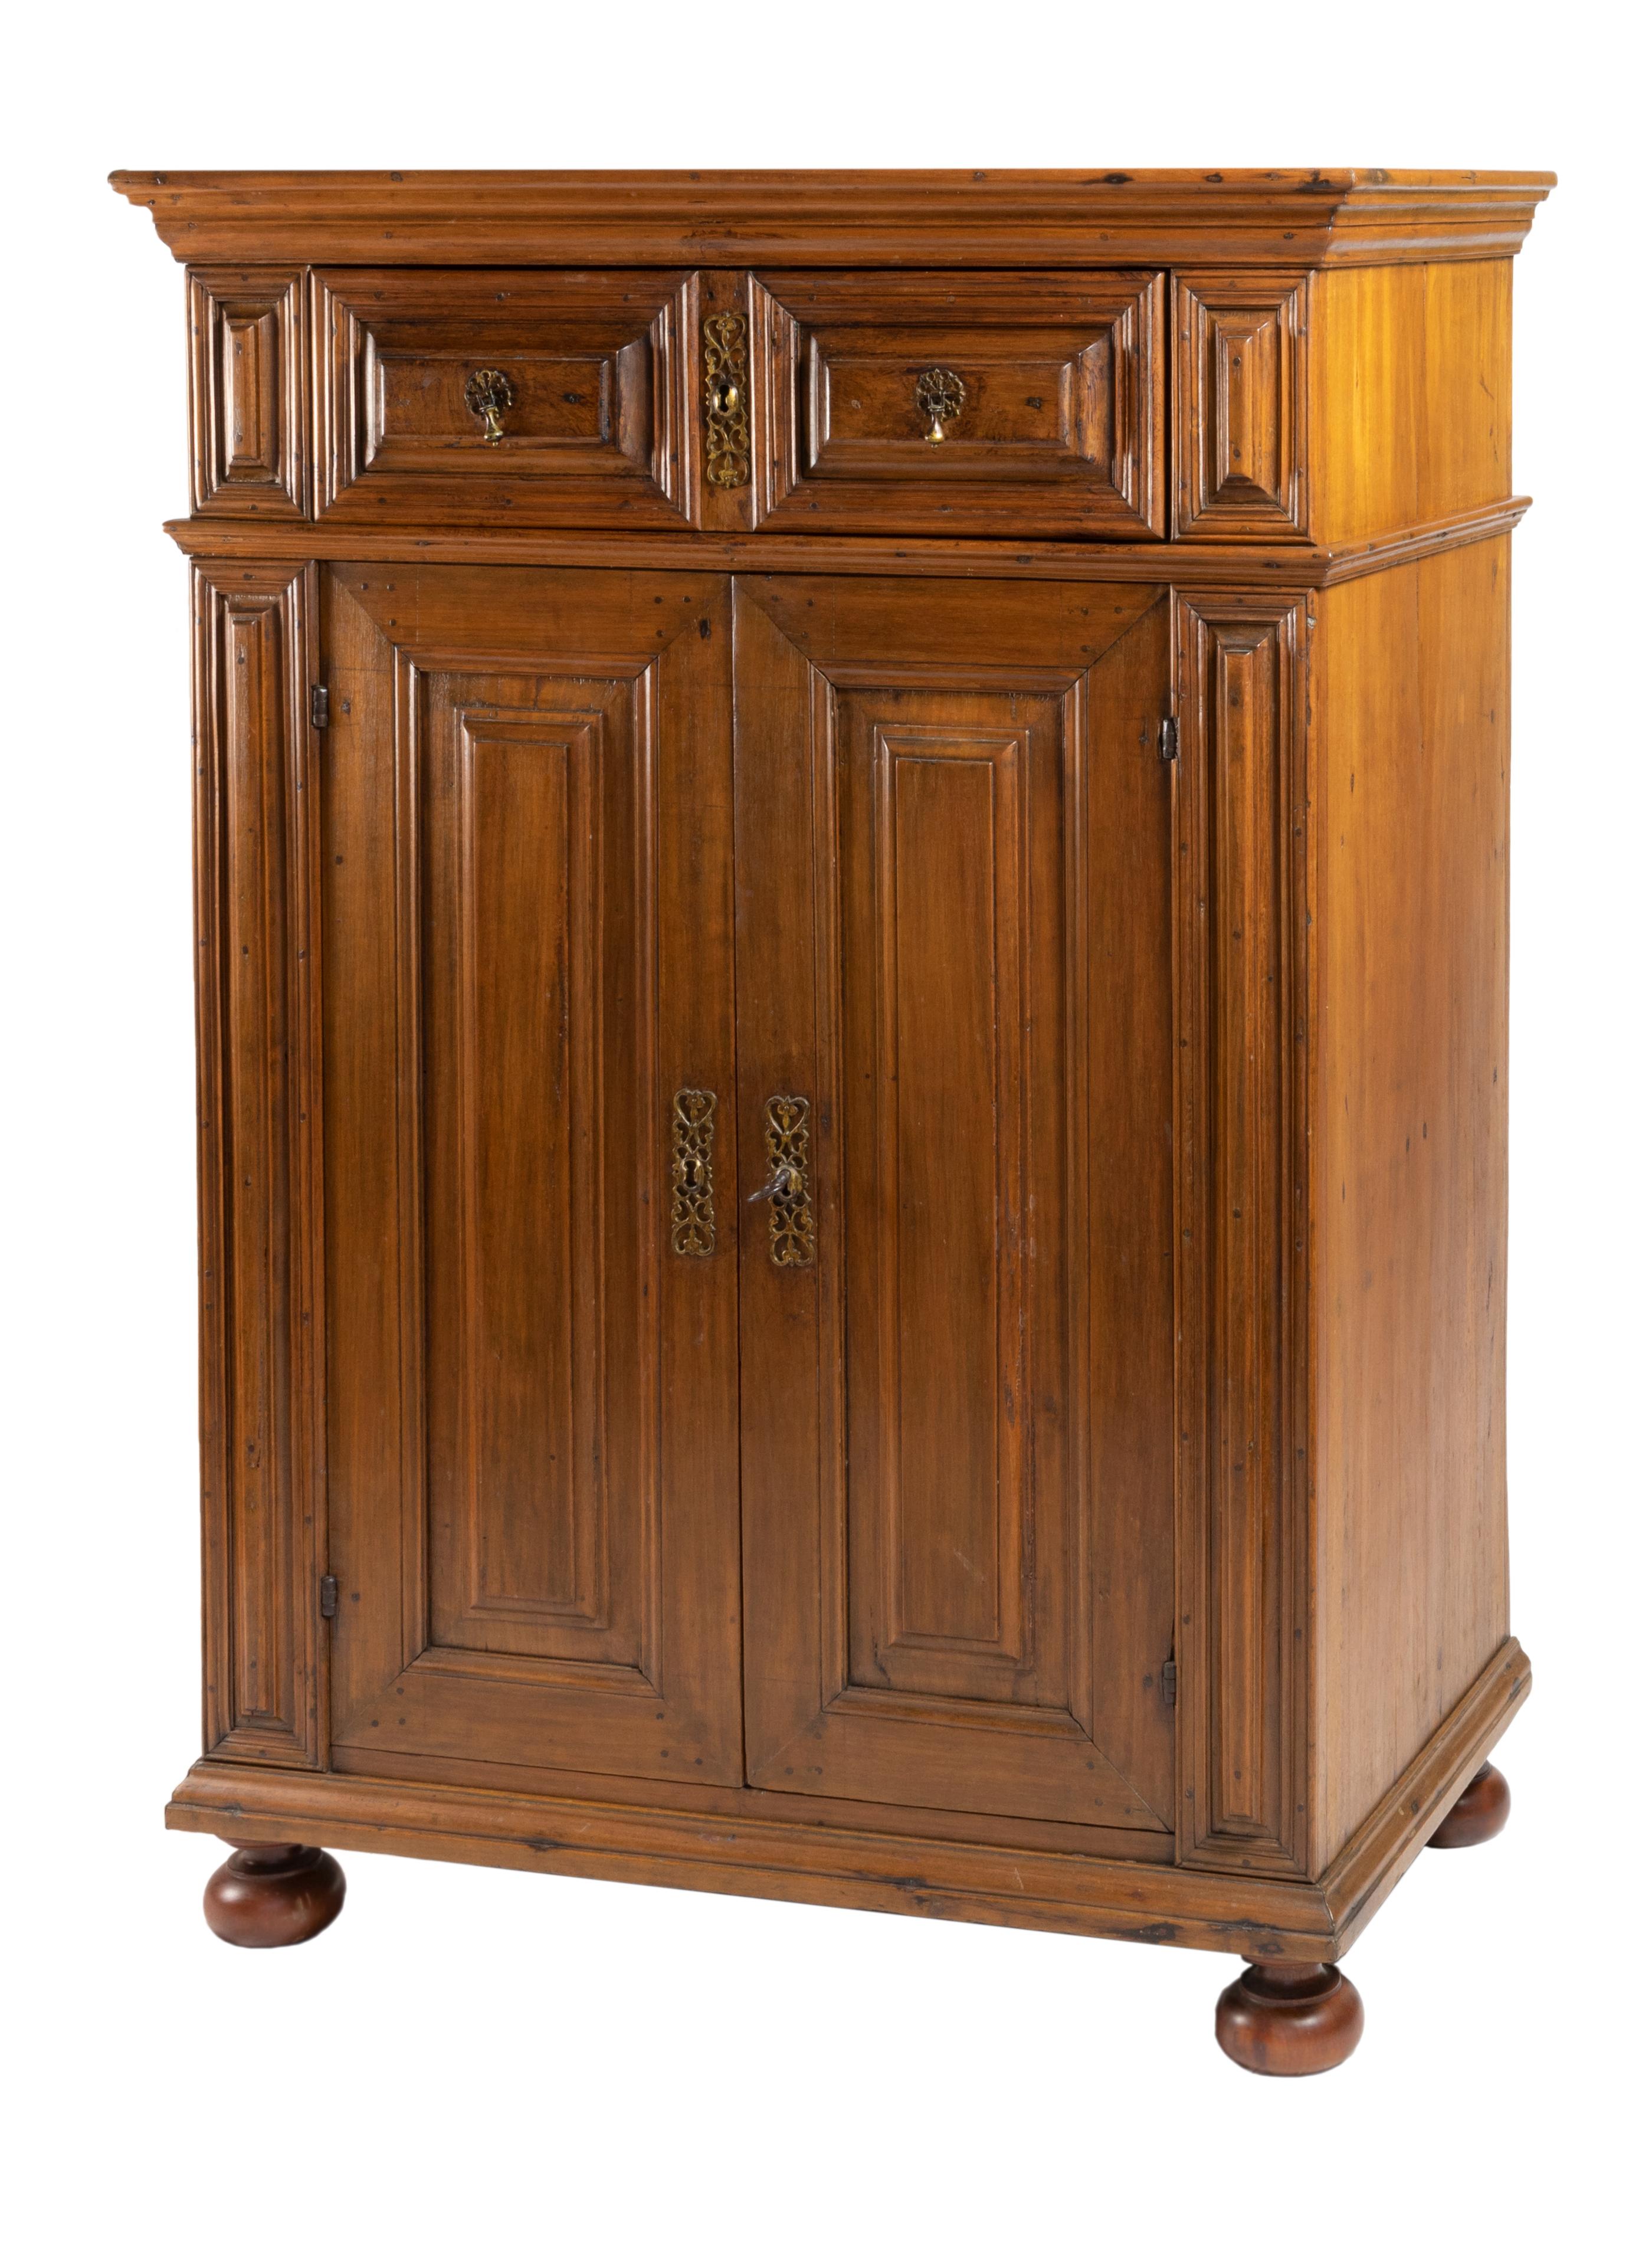 A rare and valuable cabinet from Portugal in great conditions made of Vinhatico (Madeira Mahogany or Canary Islands Mahogany) a rare wood from the Madeira and Canary islands in the North Atlantic Macaronésia. 
A two doors and two drawers piece, a